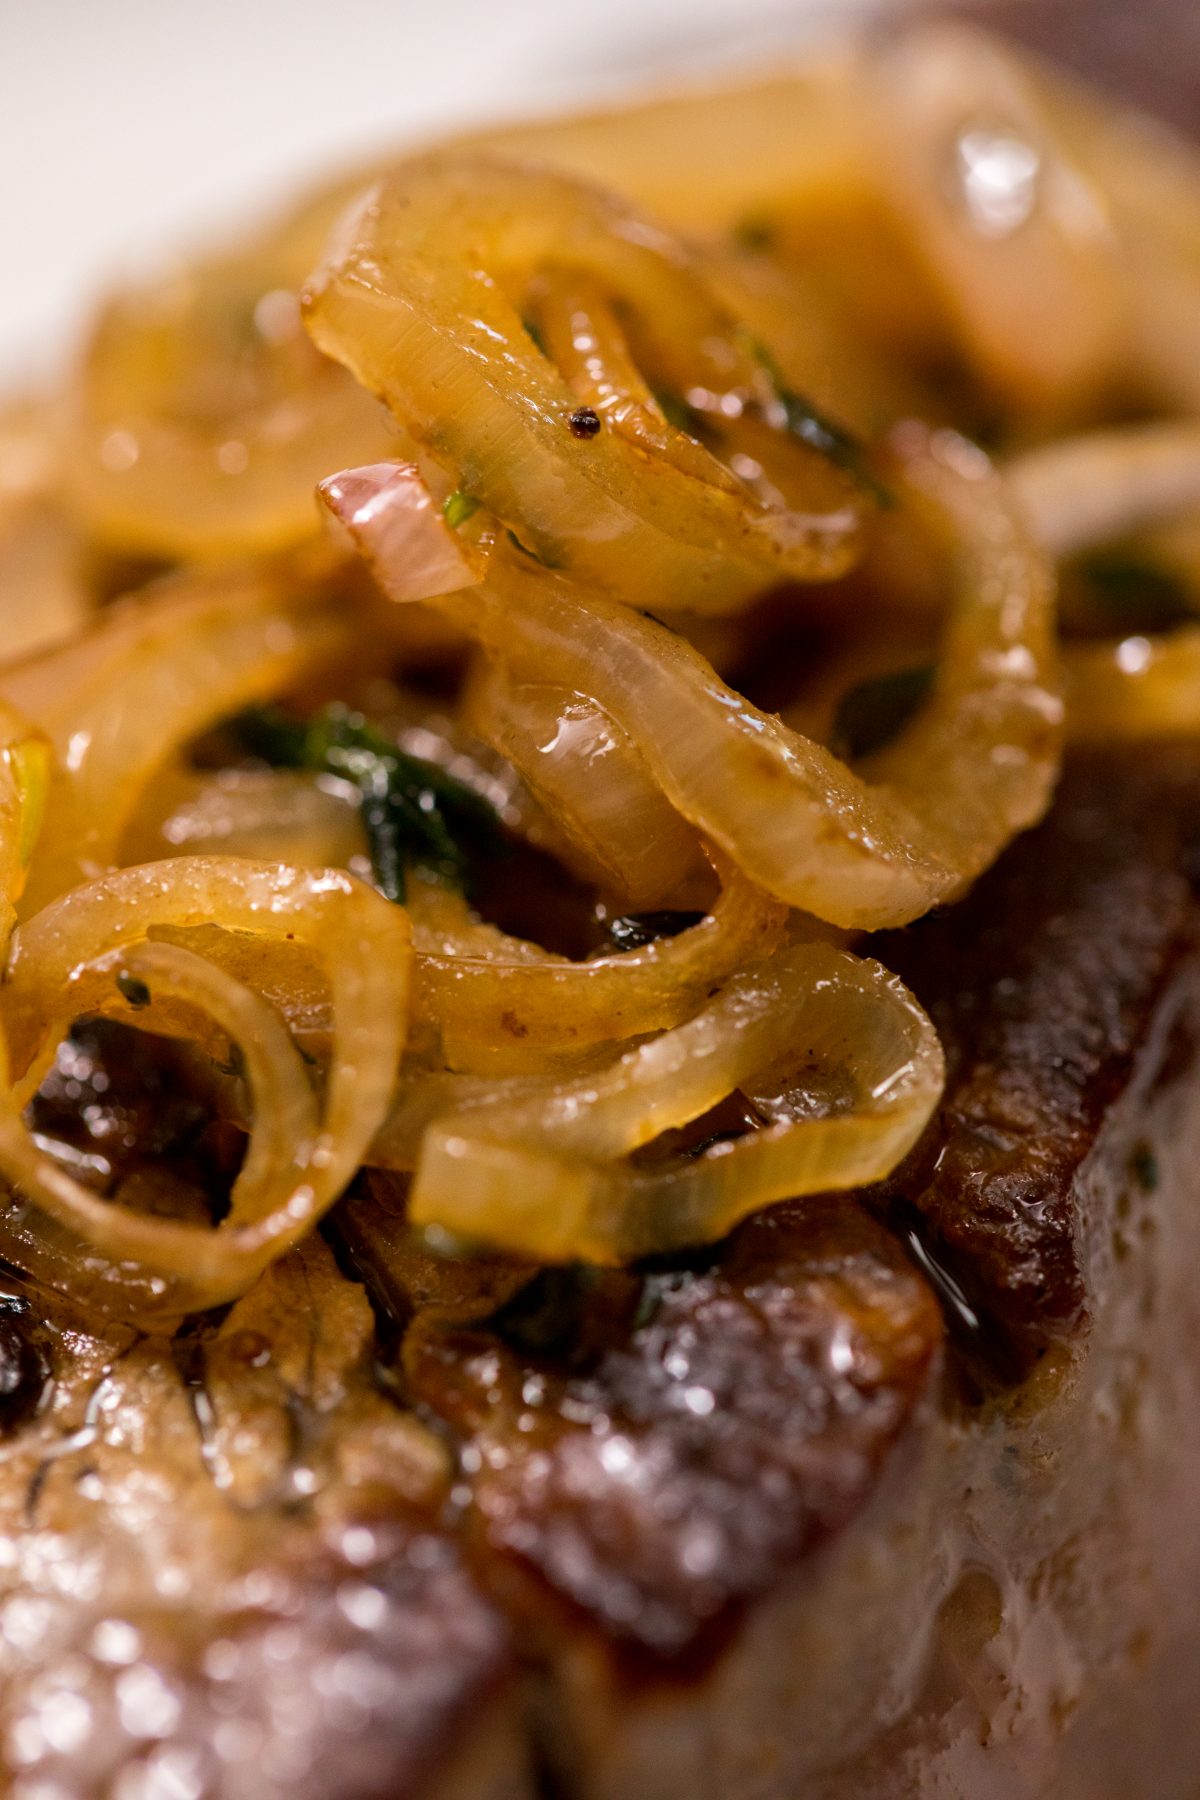 Pan-seared filet mignon with shallot butter